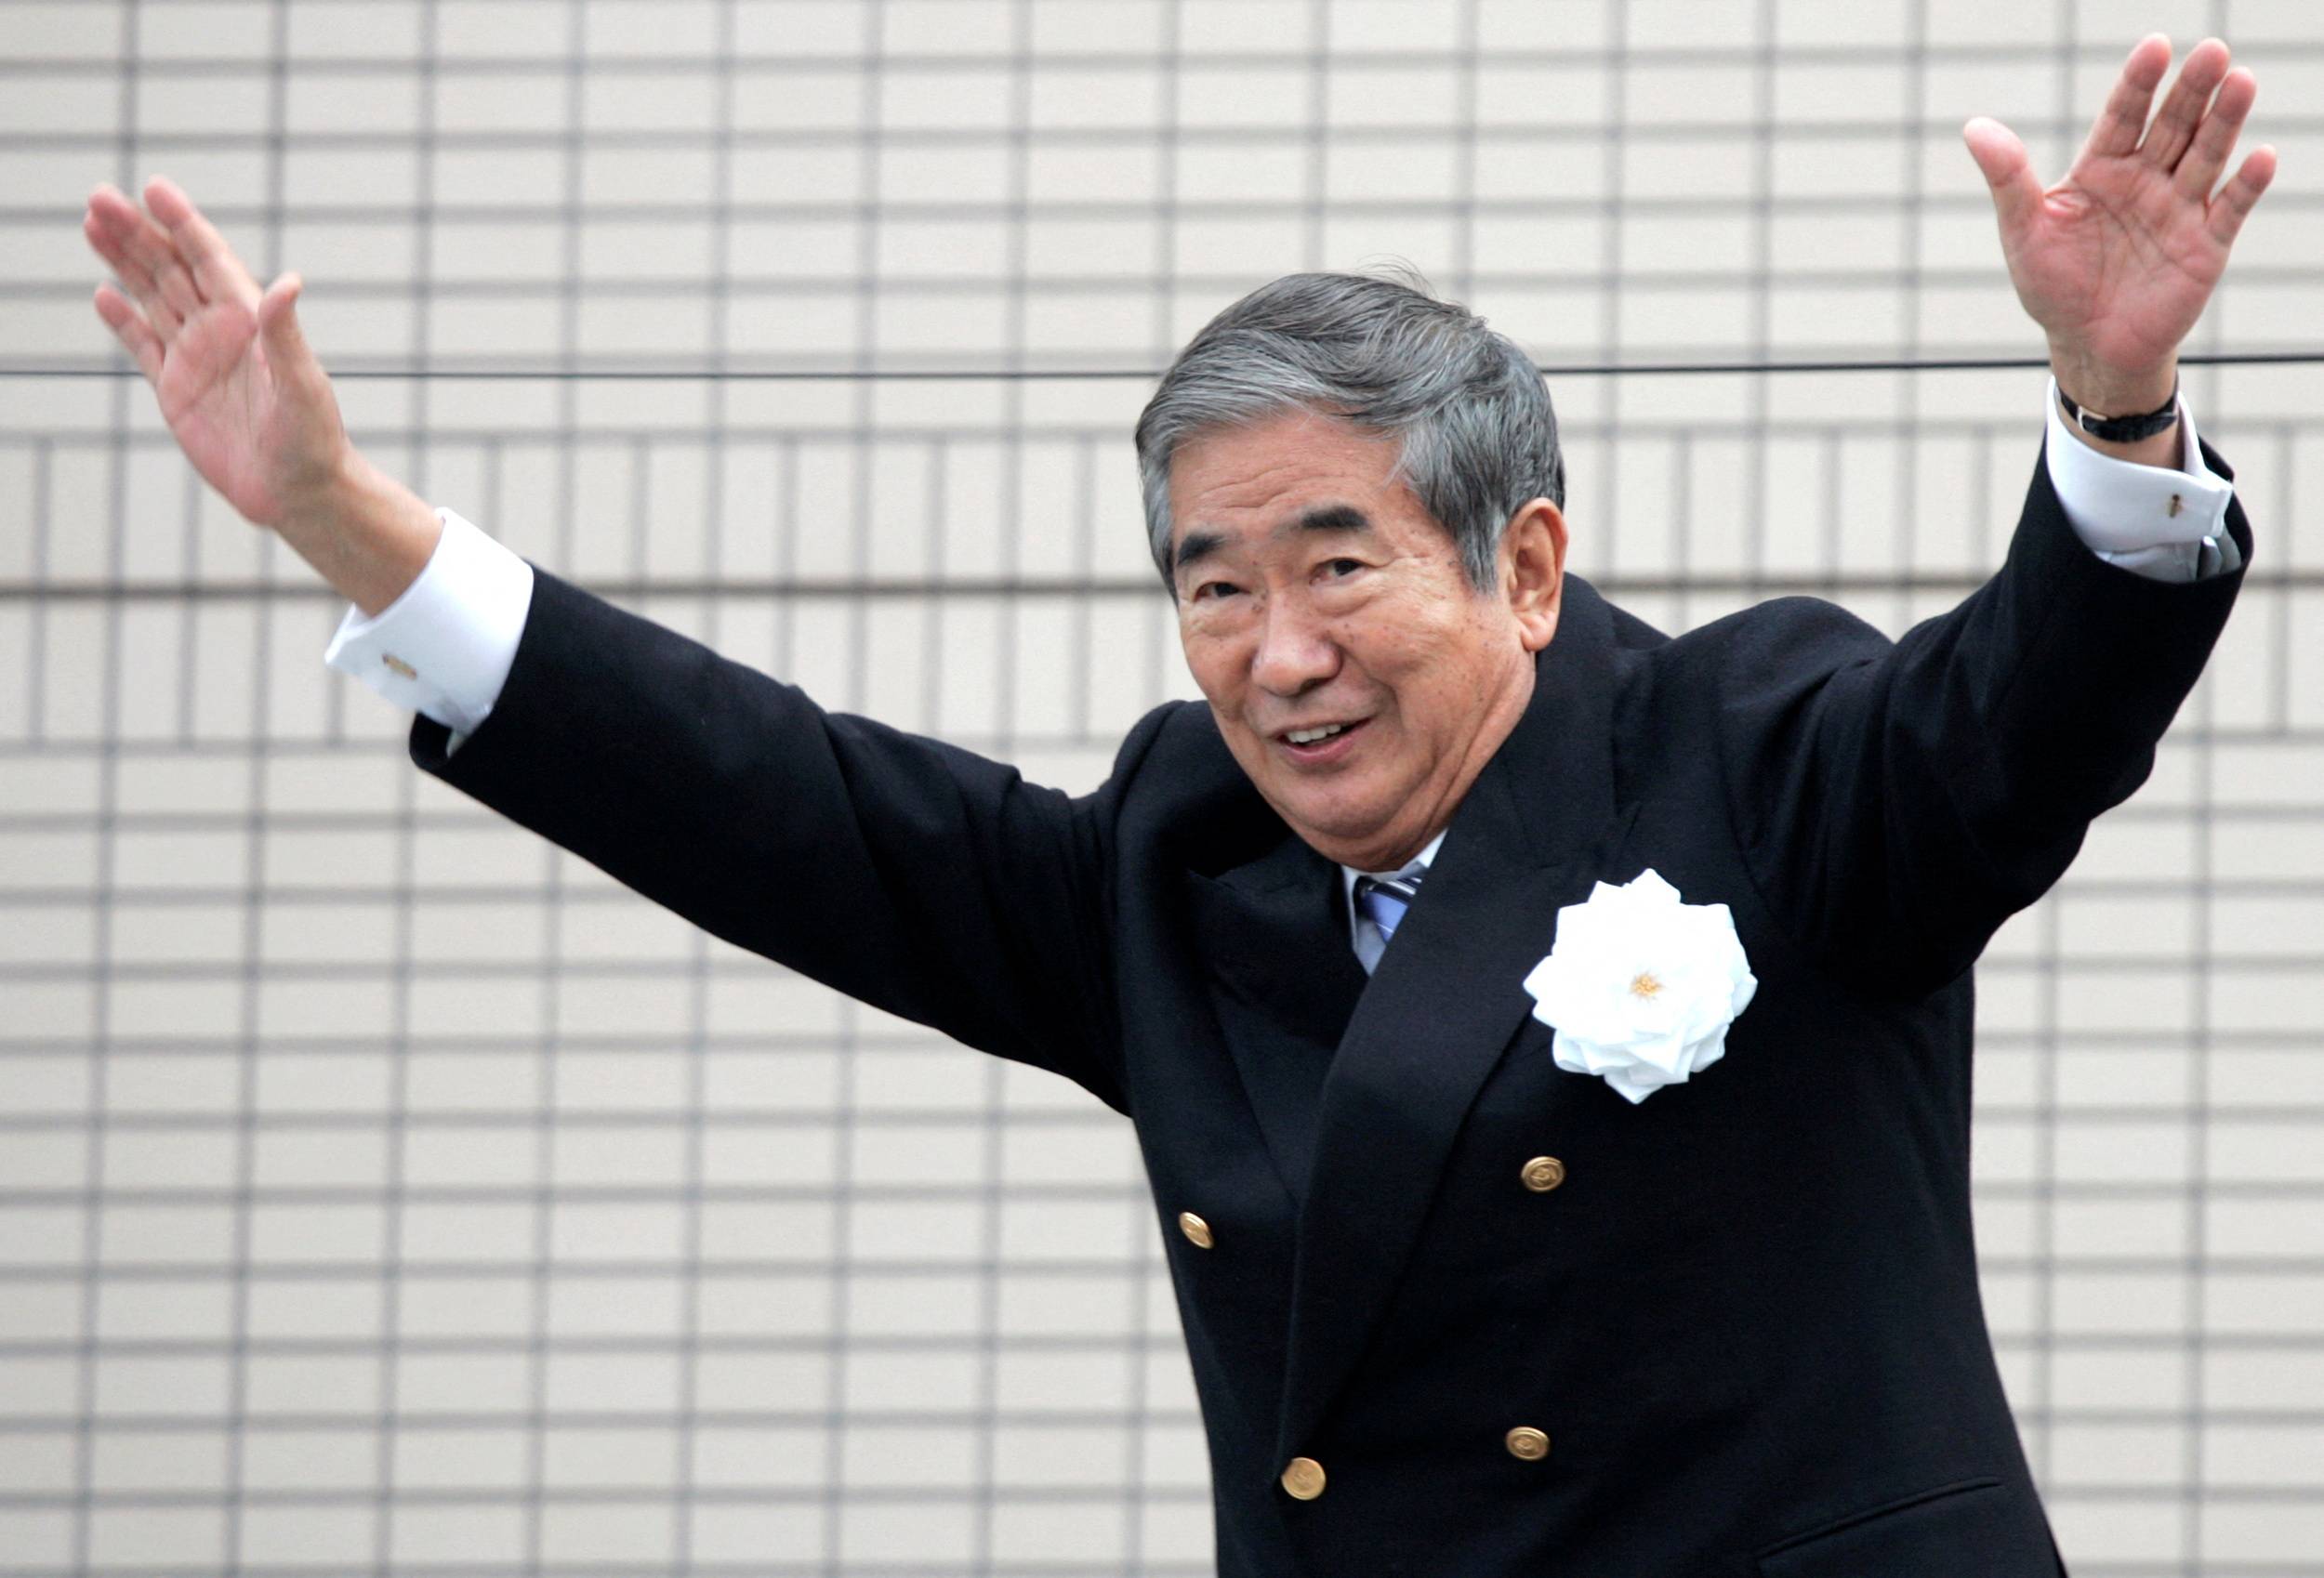 Then-Tokyo Gov. Shintaro Ishihara waves to voters while on the campaign trail in the capital in April 2007. Ishihara has died at the age of 89, his family said Tuesday. | REUTERS